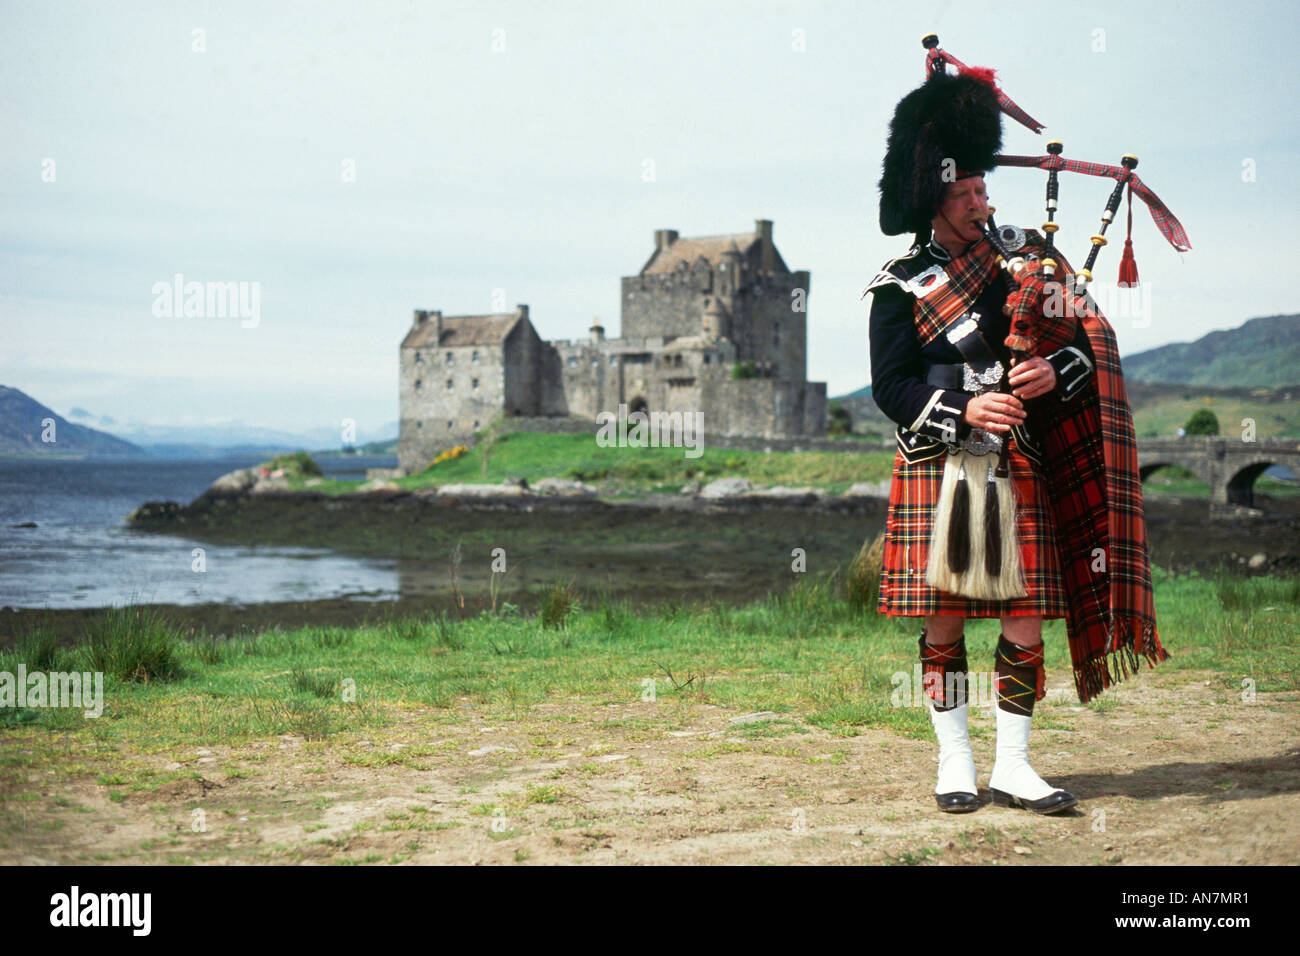 A Lone Piper Stock Photos & A Lone Piper Stock Images - Alamy